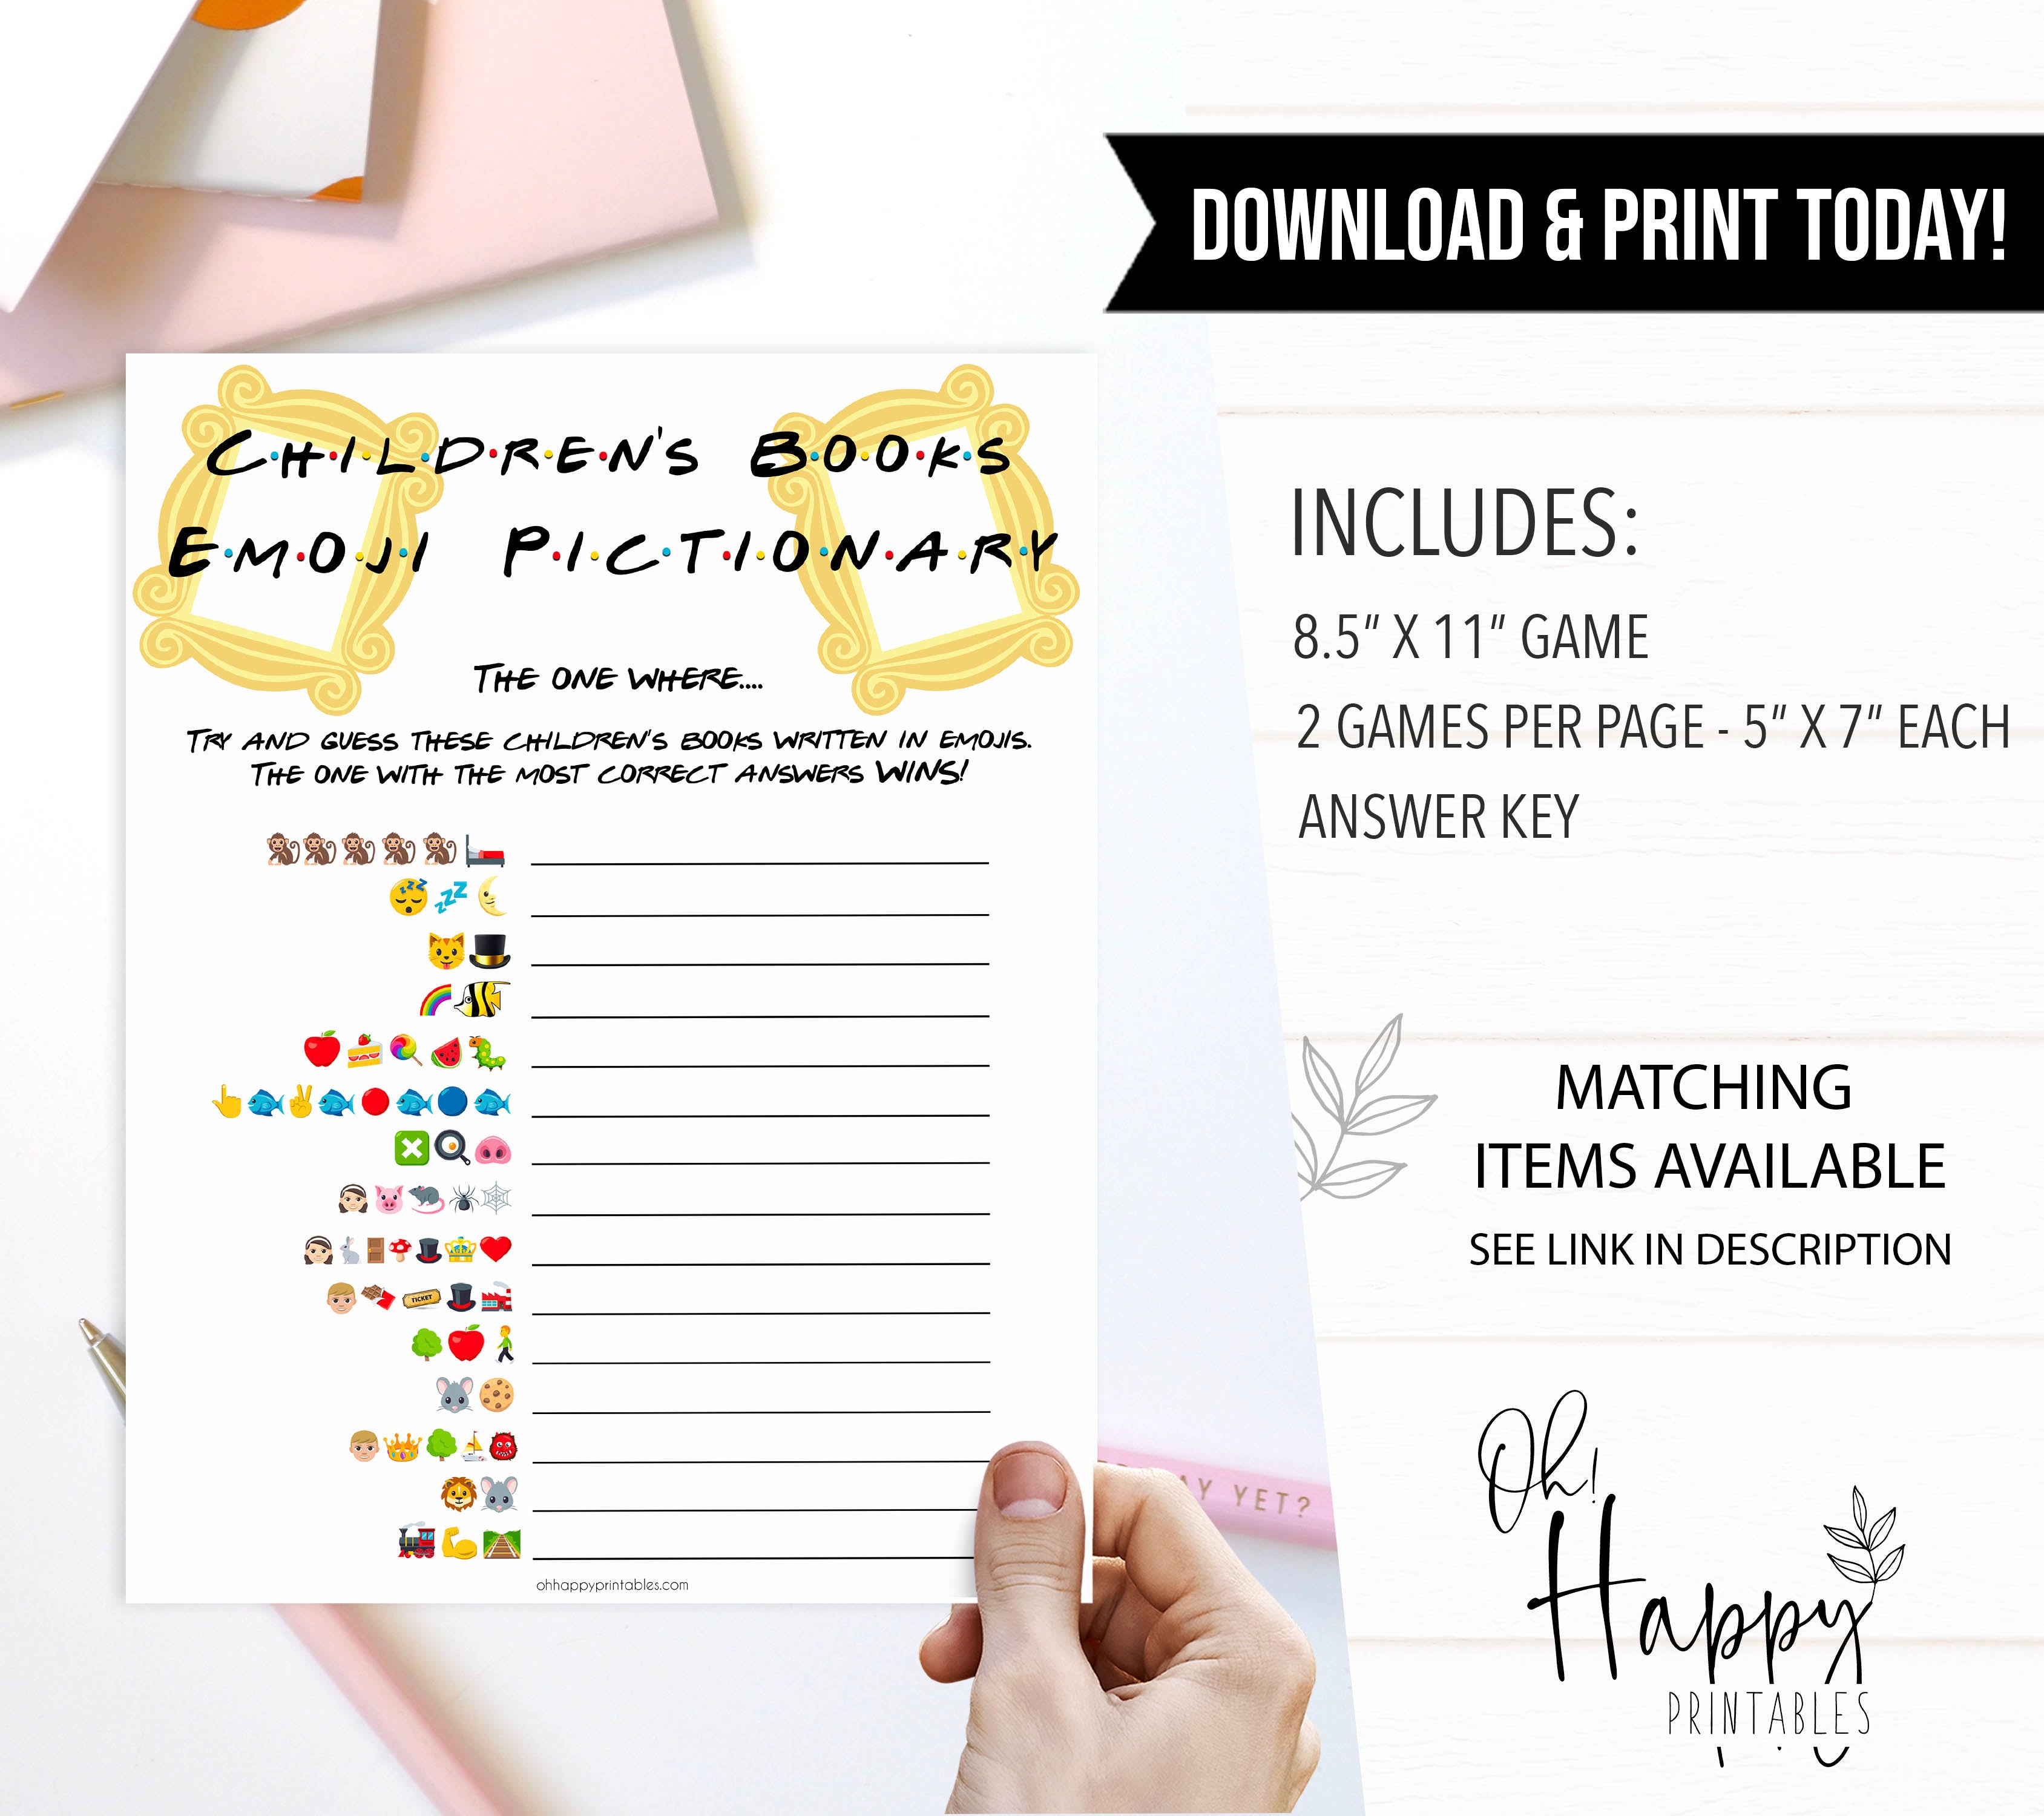 childrens books emoji pictionary, printable baby shower games, friends baby shower theme, the one where baby shower